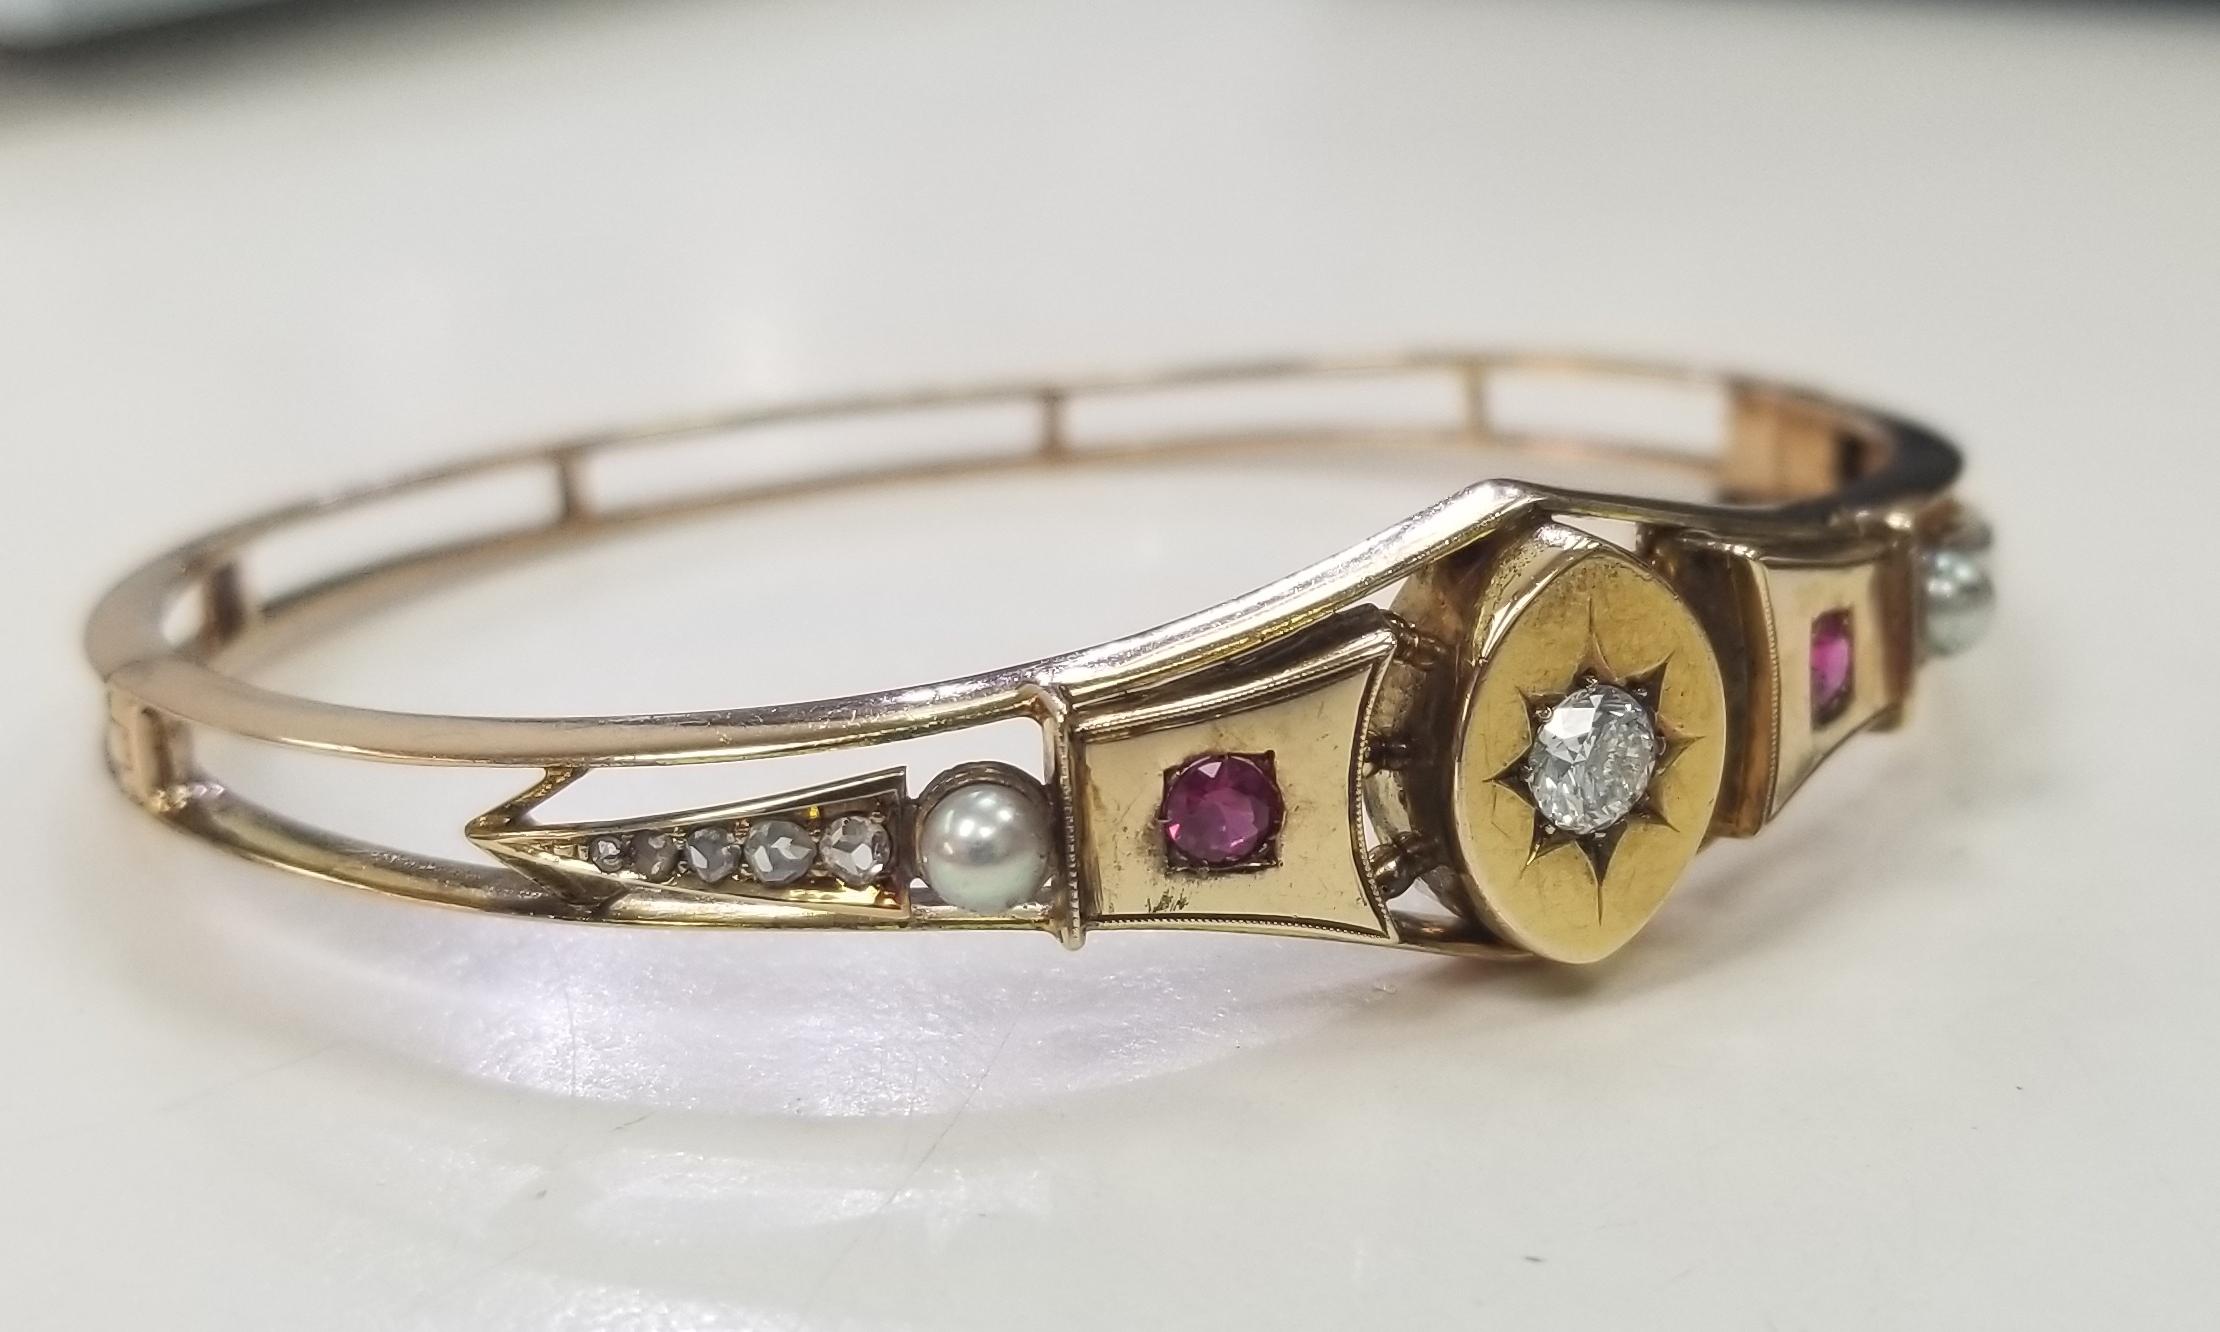 Vintage 14 Karat Yellow Gold Handmade Diamond Bangle Bracelet, containing 
Specifications:
    main stone: ROUND CUT DIAMONDS
    carat total weight: center diamond .25pts. color H and clarity SI2
   additional diamonds; 10 round diamonds weighing